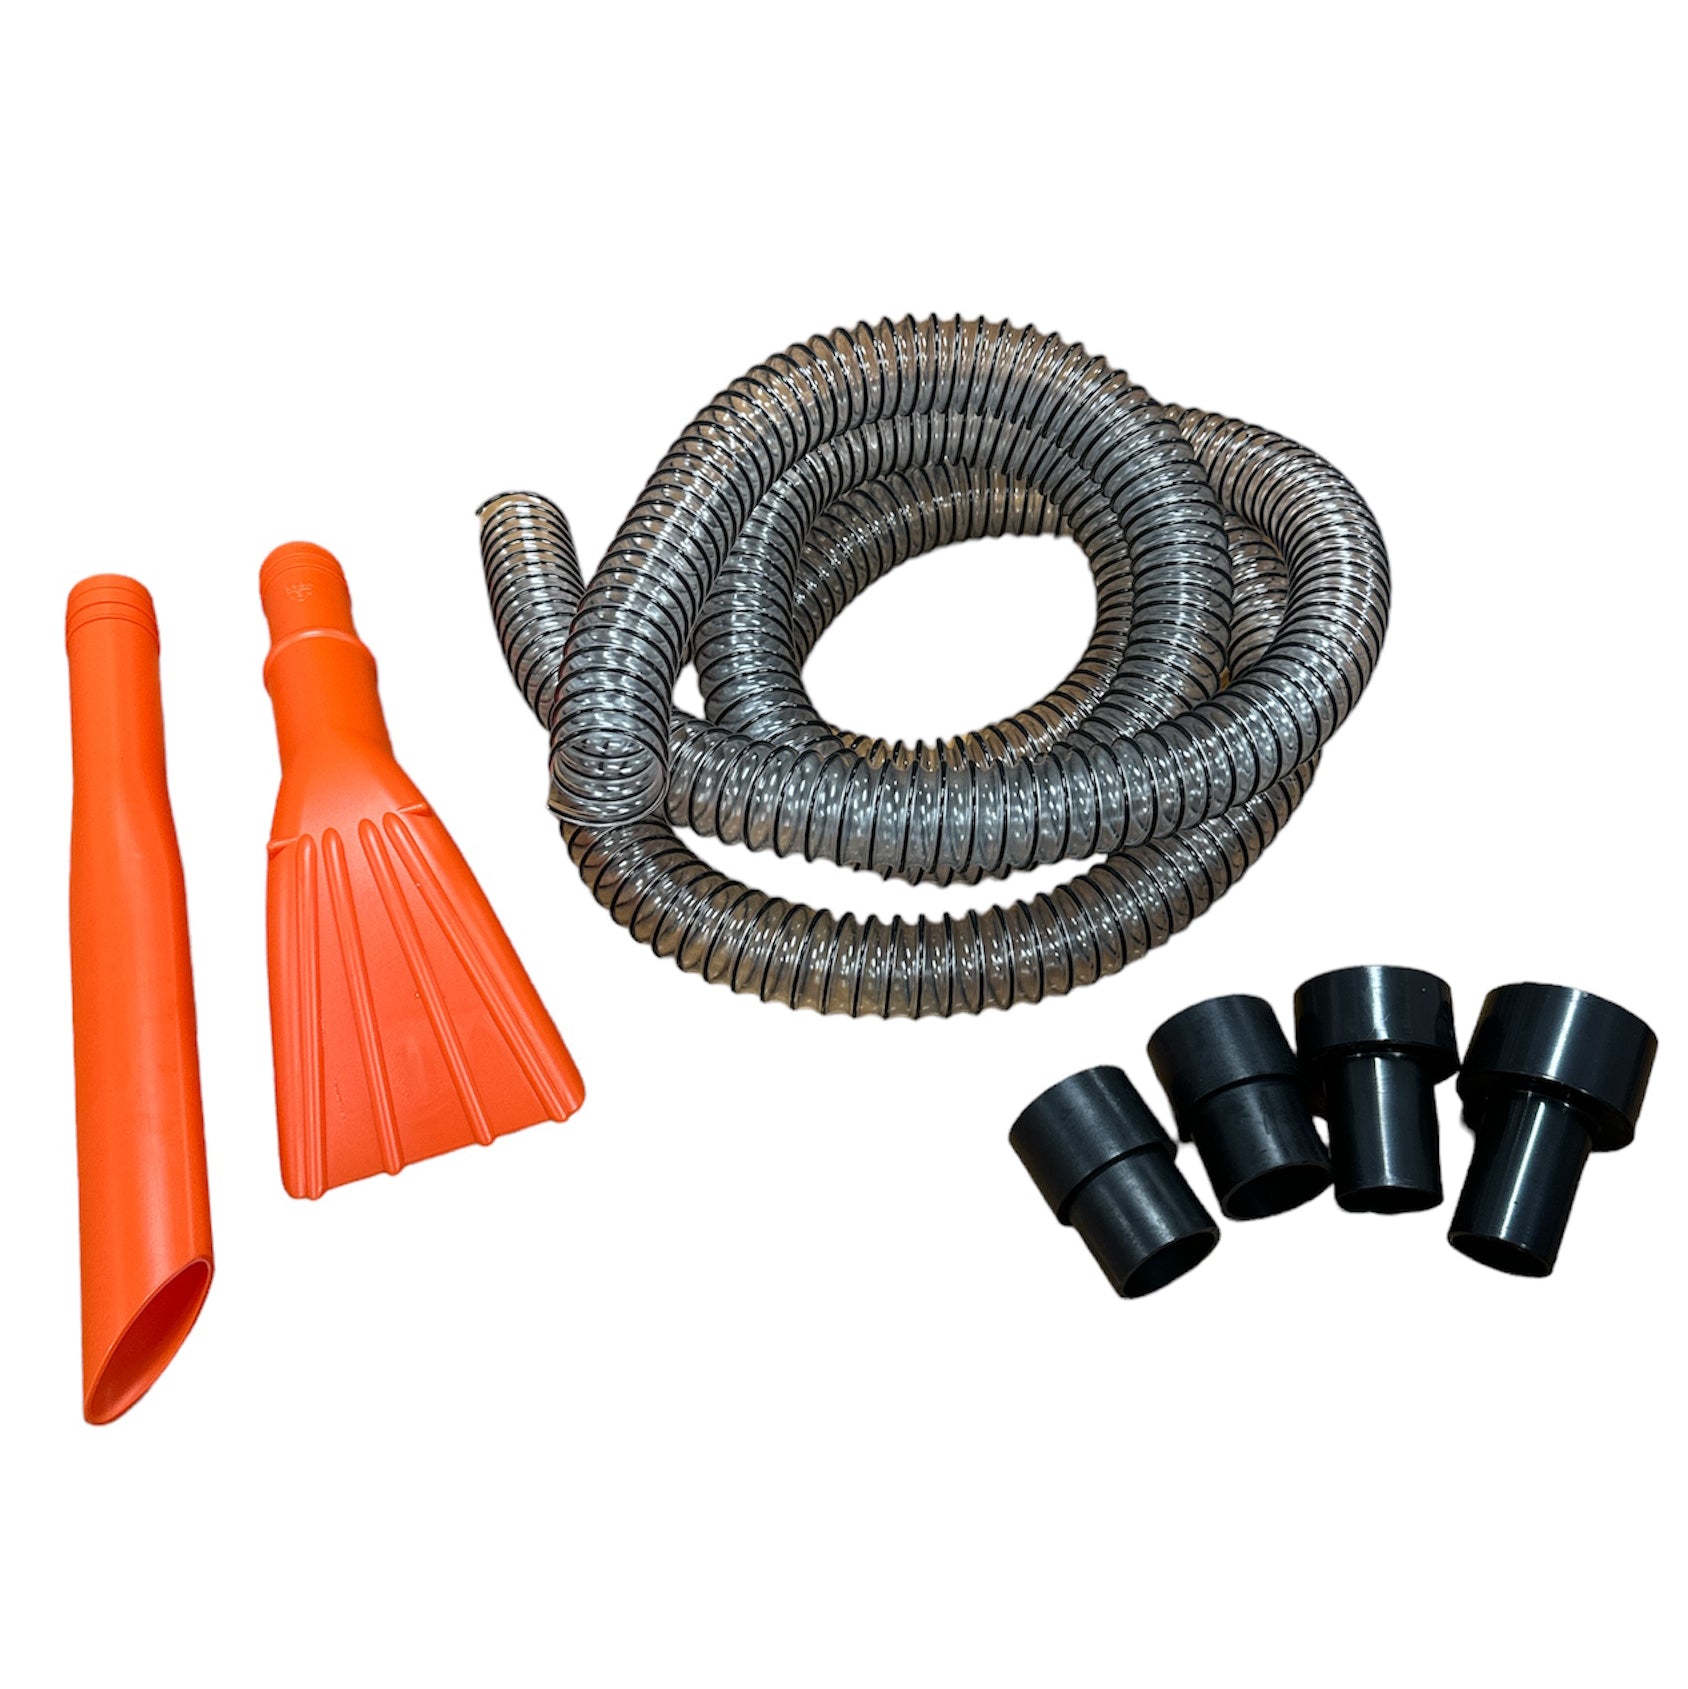 Dust Collection / Vacuum Hose & Accessory (2-1/2") Kit 7Pce Z-85 by Oltre